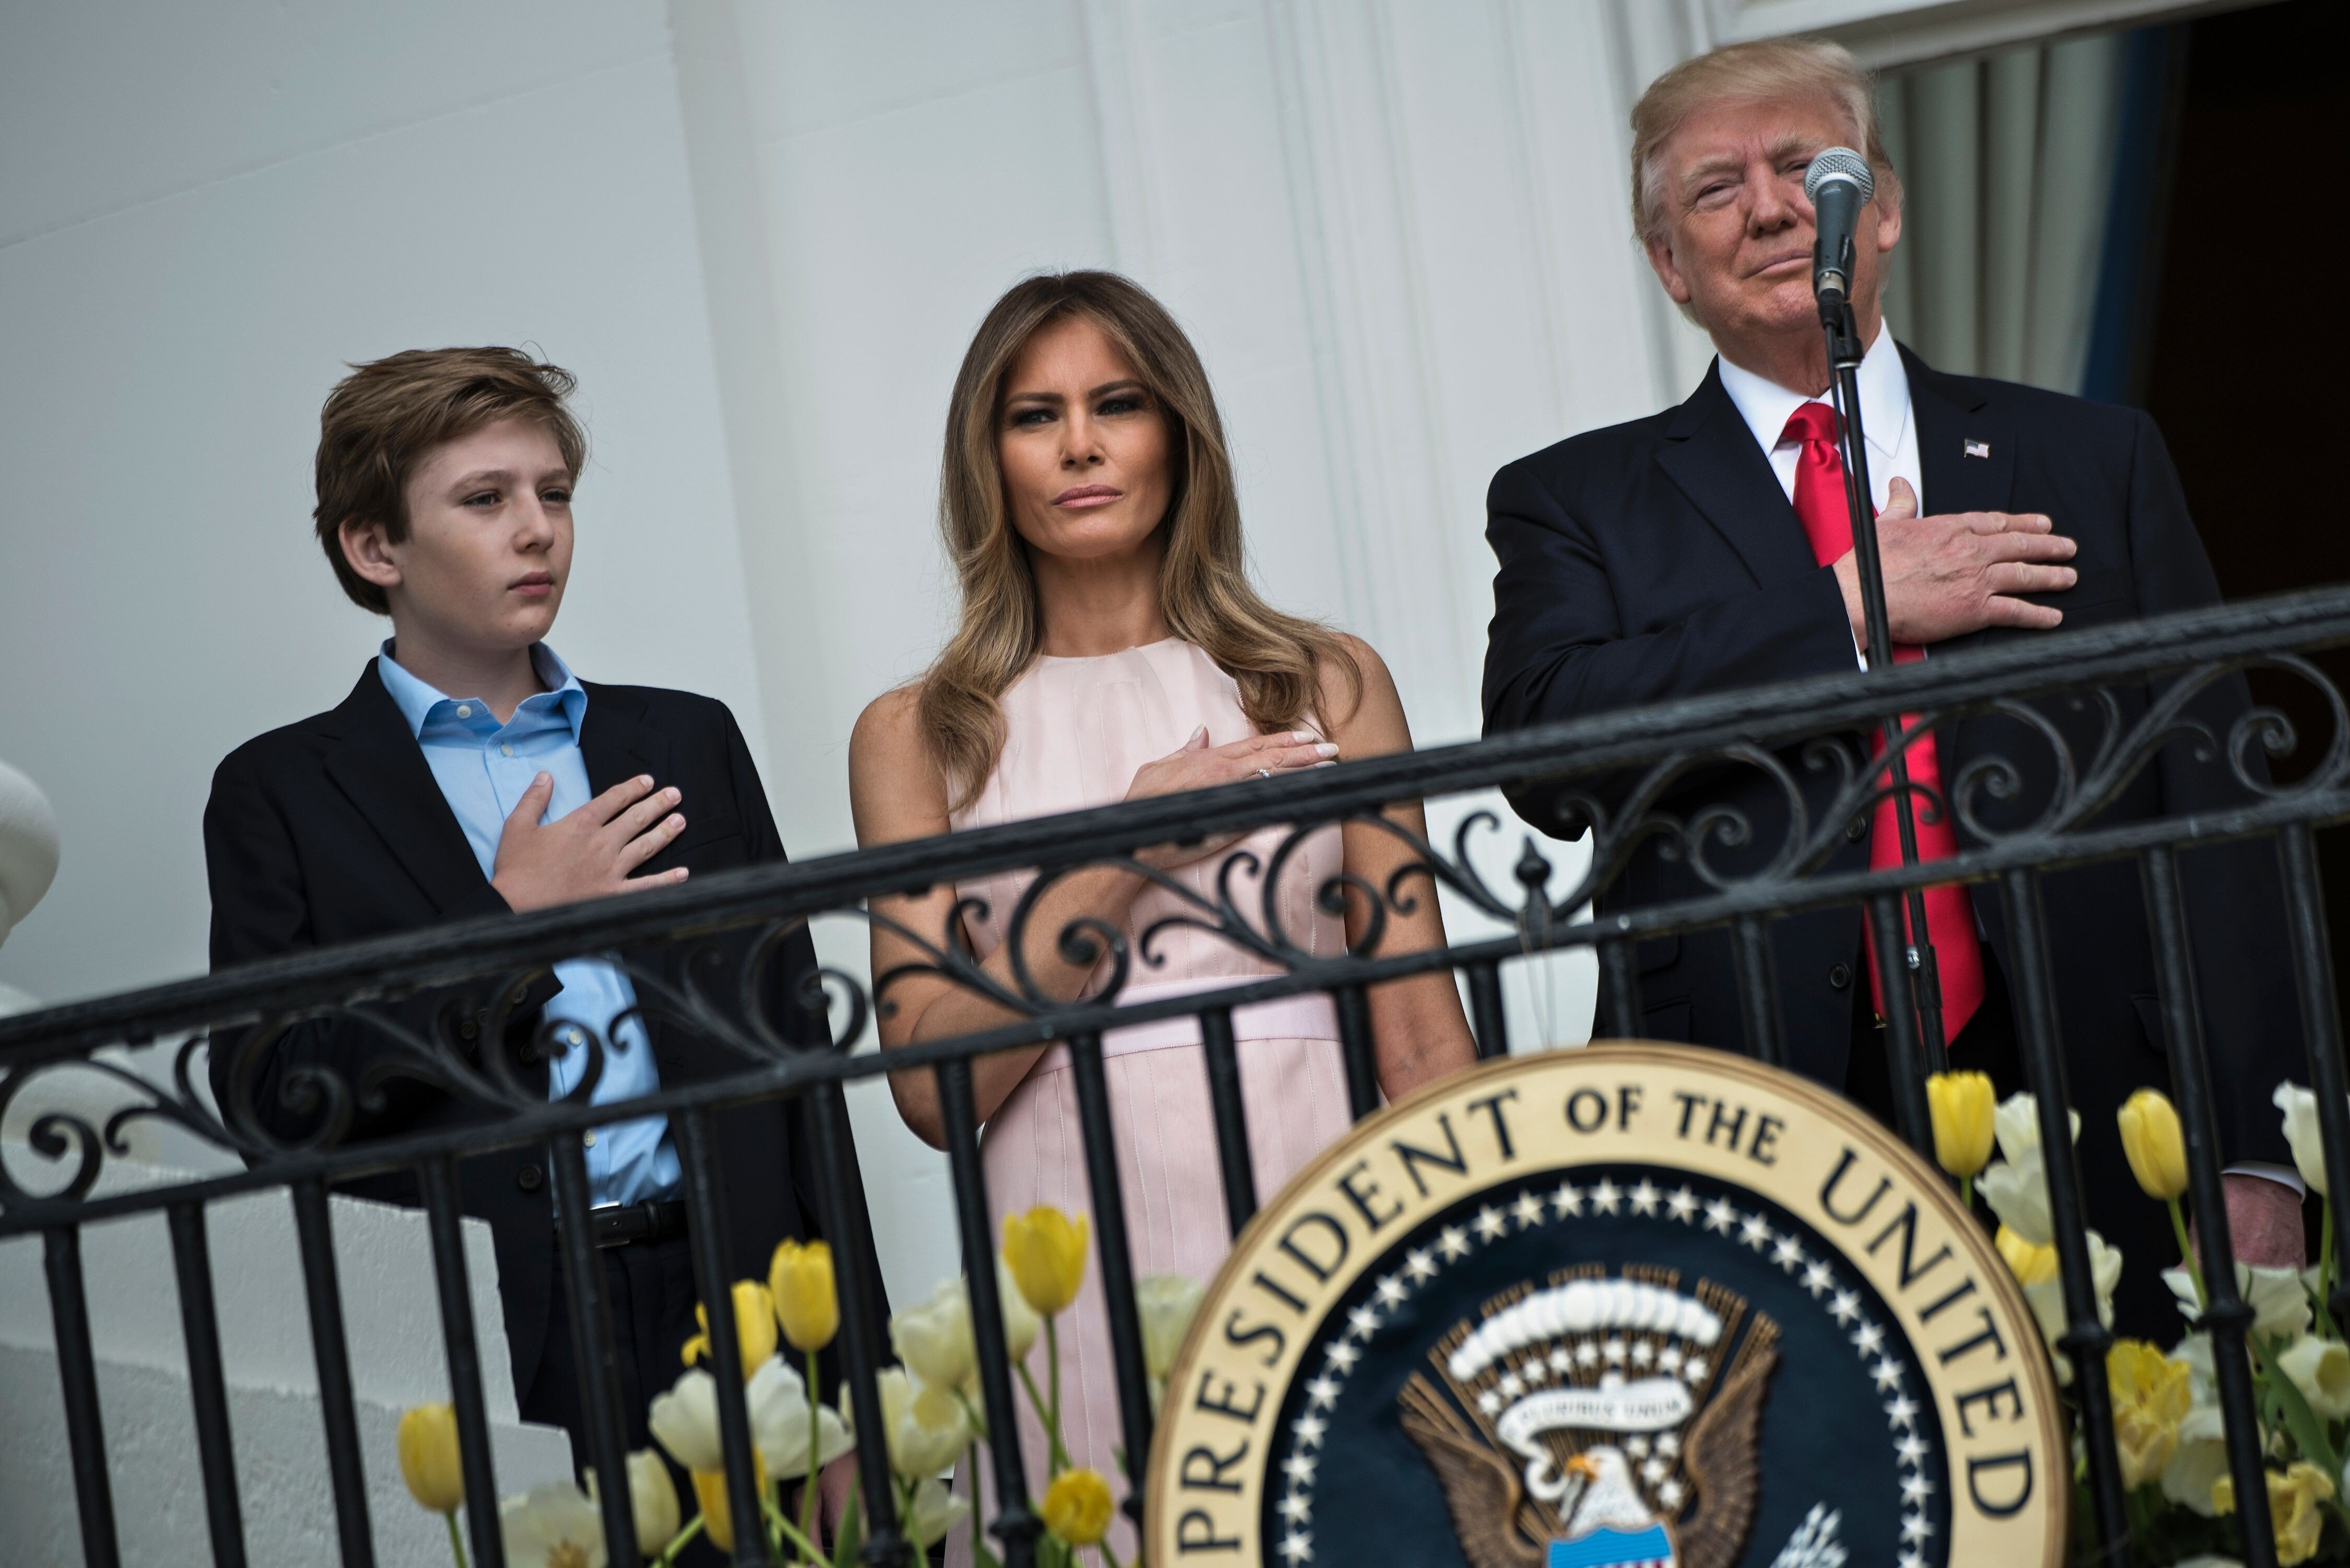 Barron Trump and first lady Melania Trump at the White House in April 2017. Photo: Agence France-Presse